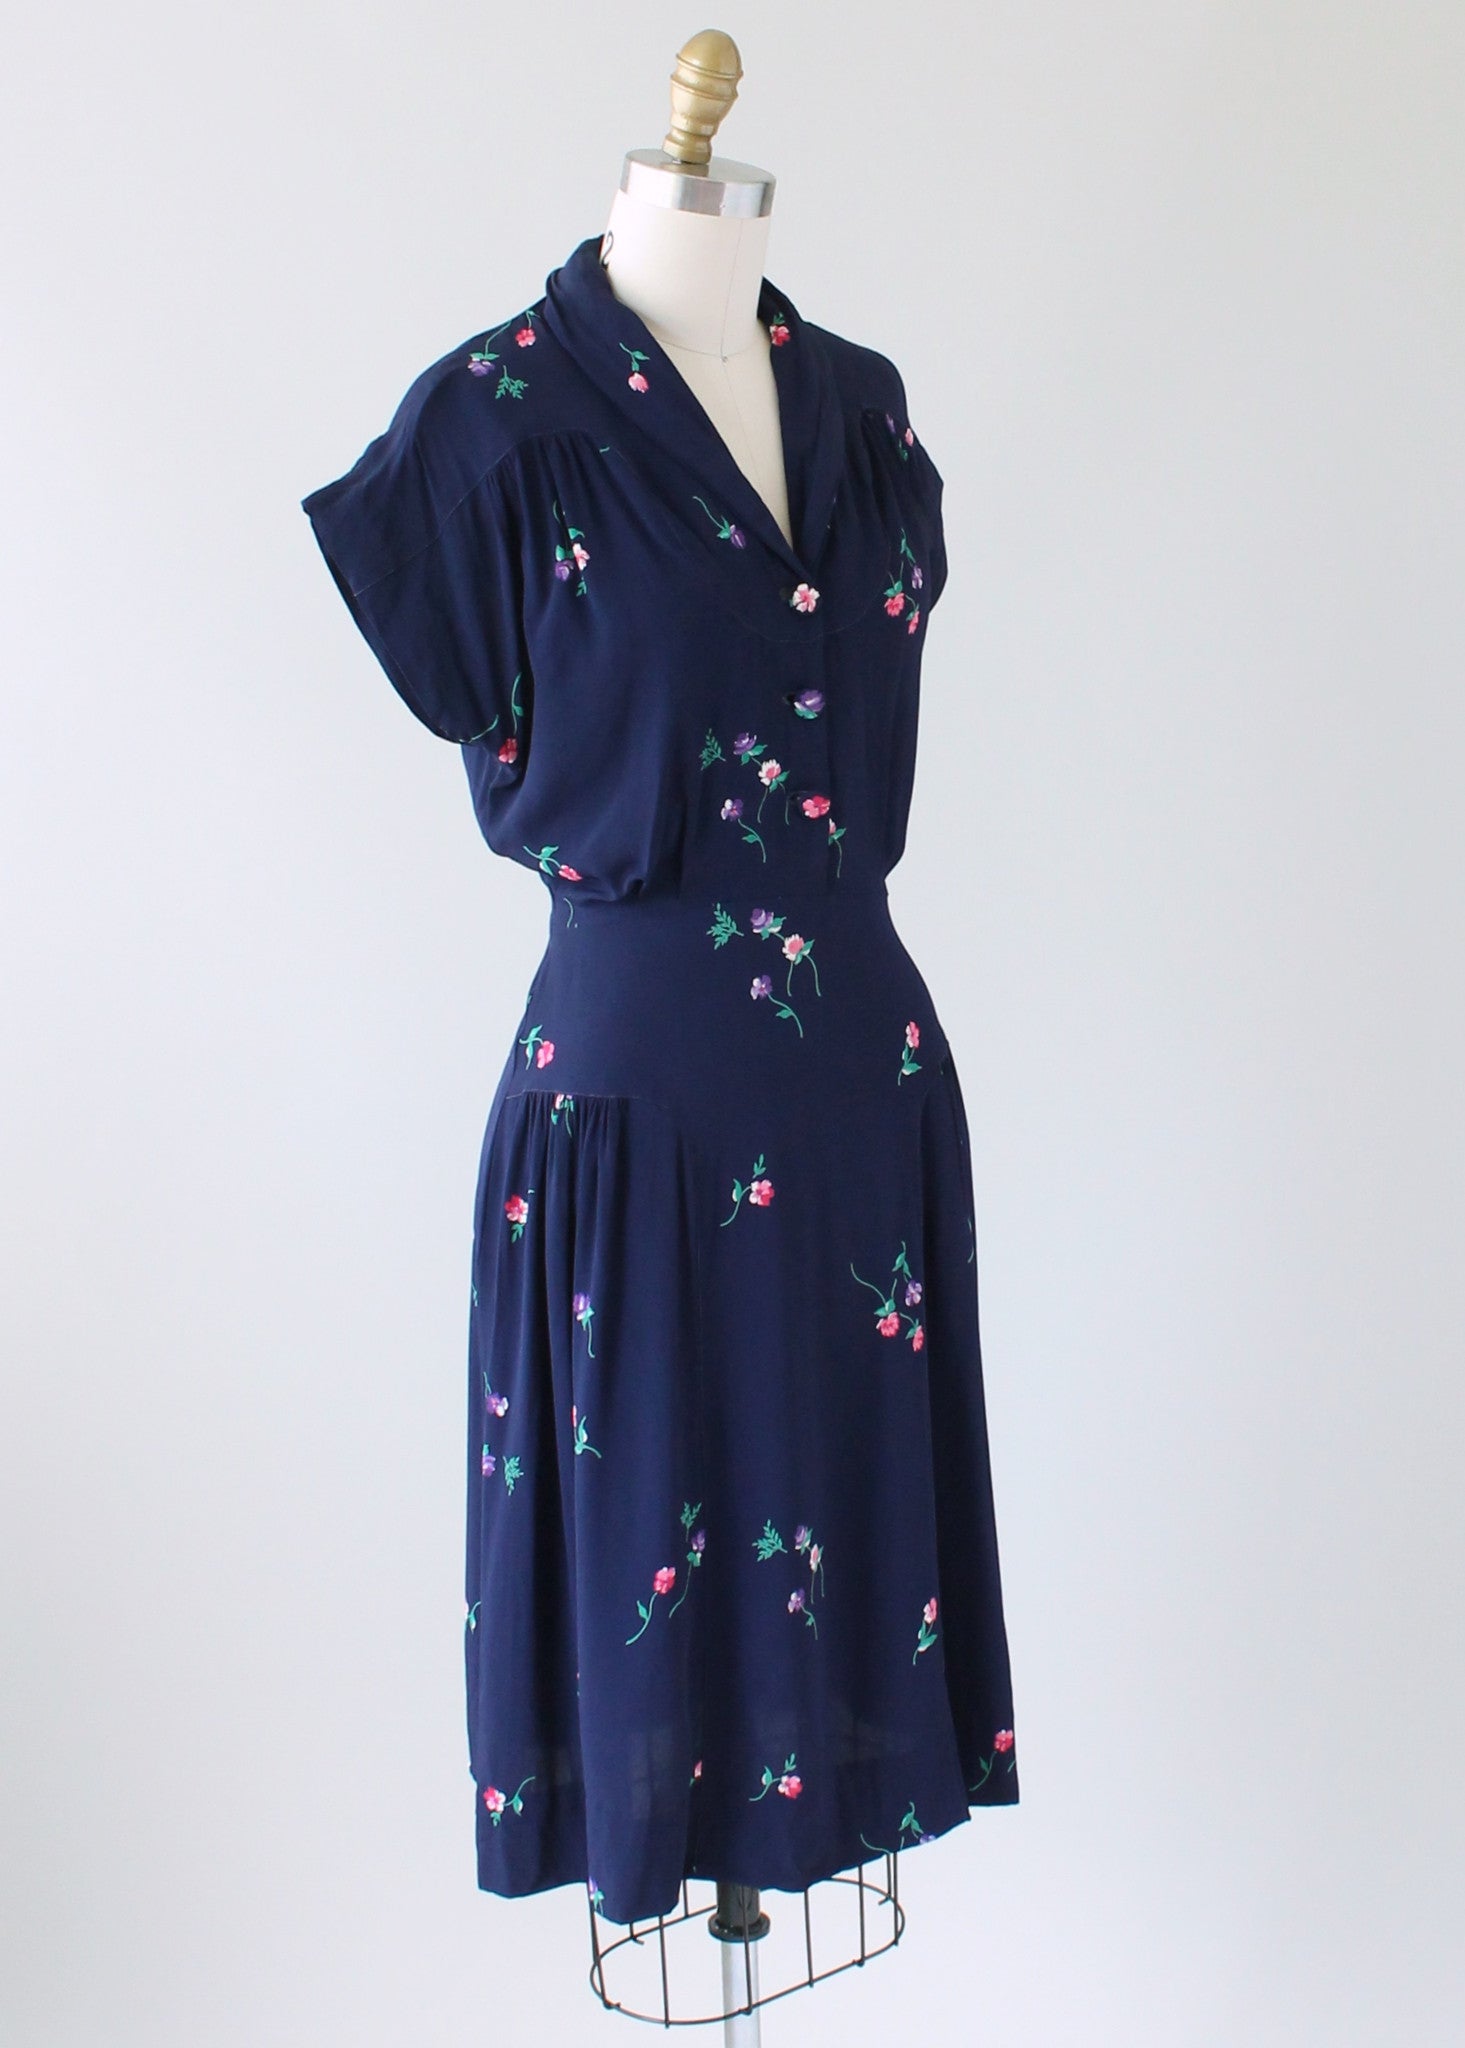 Vintage 1940s Navy Rayon Day Dress with Petite Flowers - Raleigh Vintage